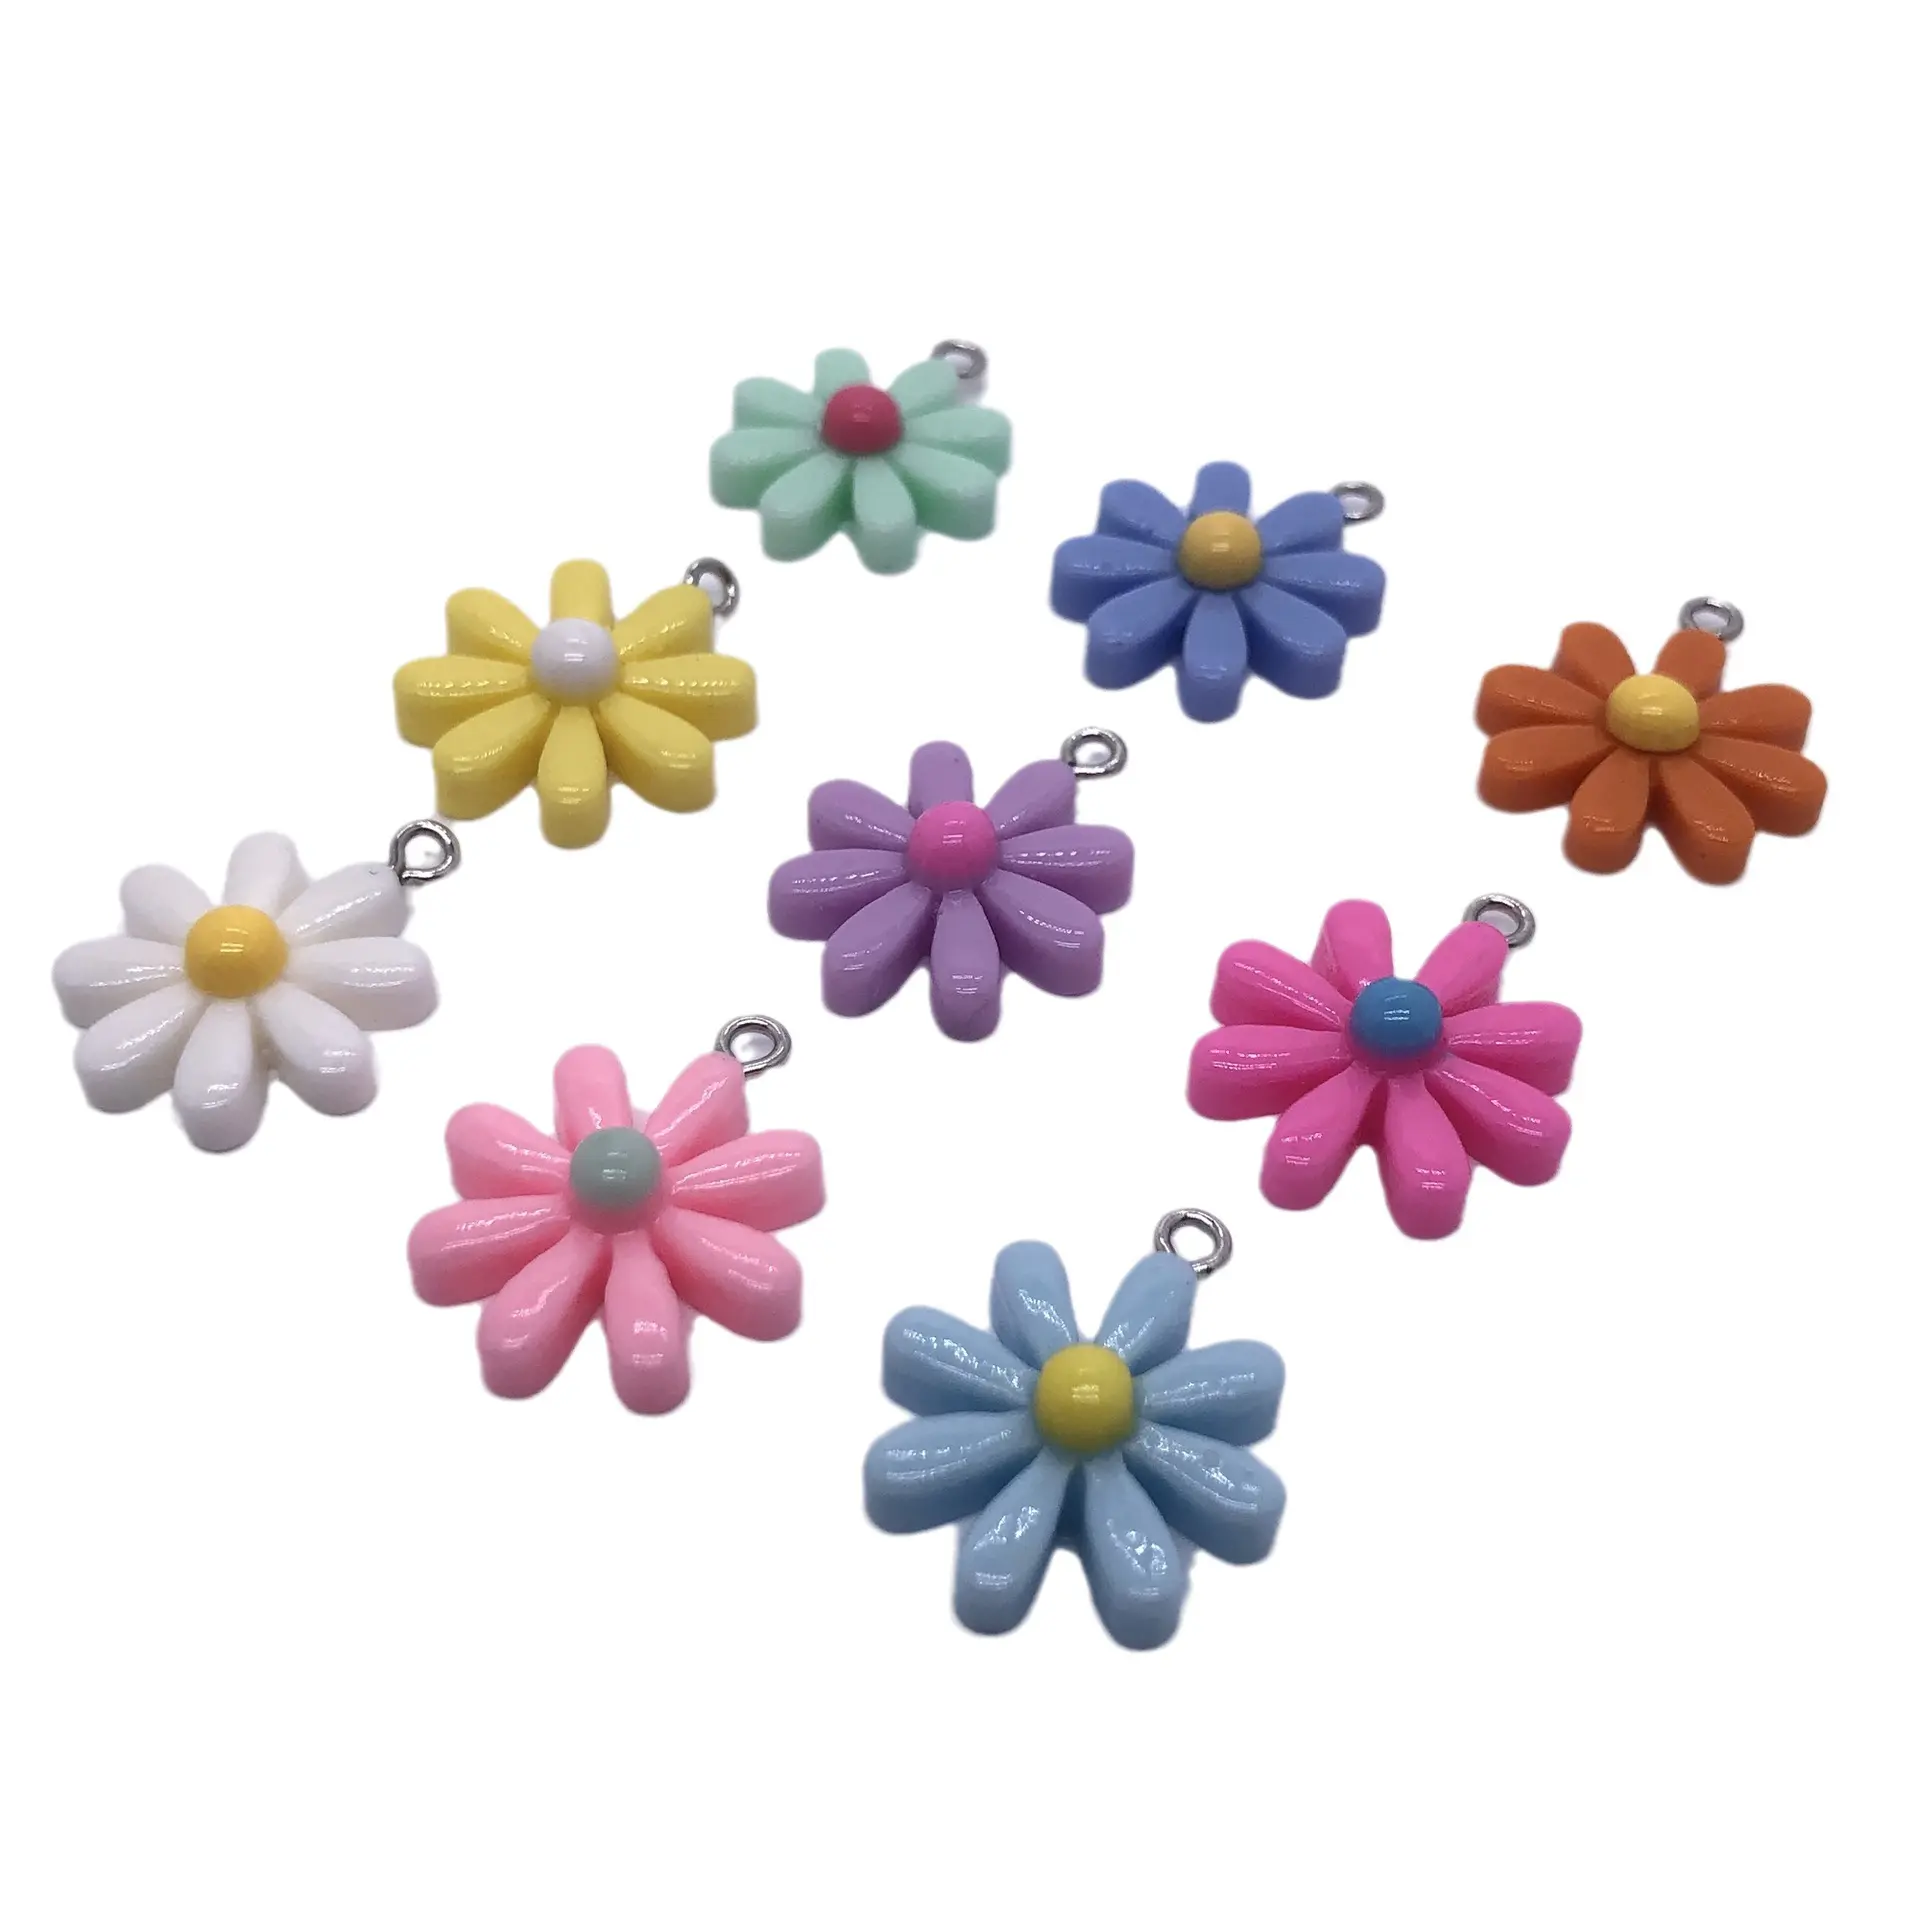 H2699 20mm Resin Daisy Flower Jewelry Charm For Diy Earring Making